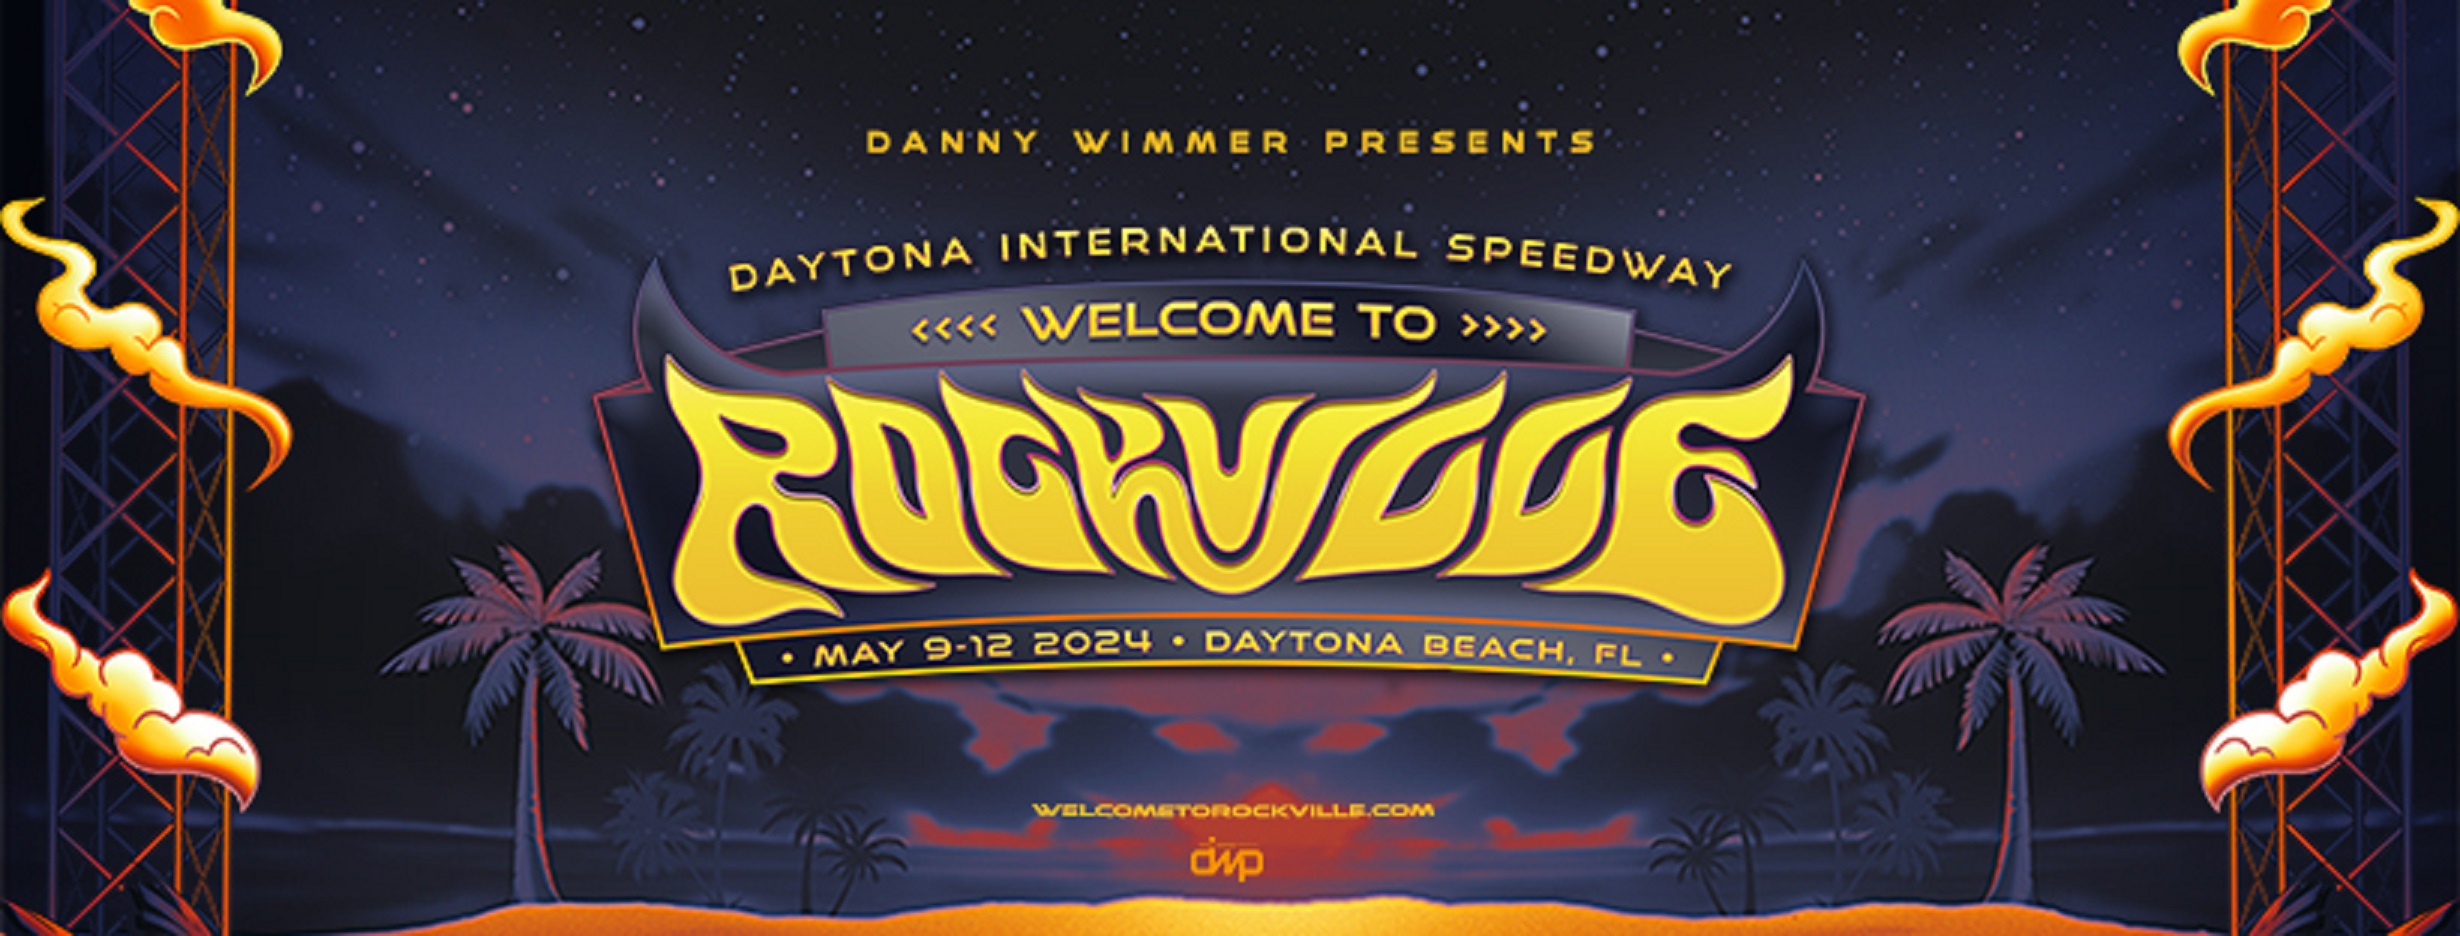 Welcome To Rockville: 200,000 Fans Expected May 9-12 In Daytona Beach